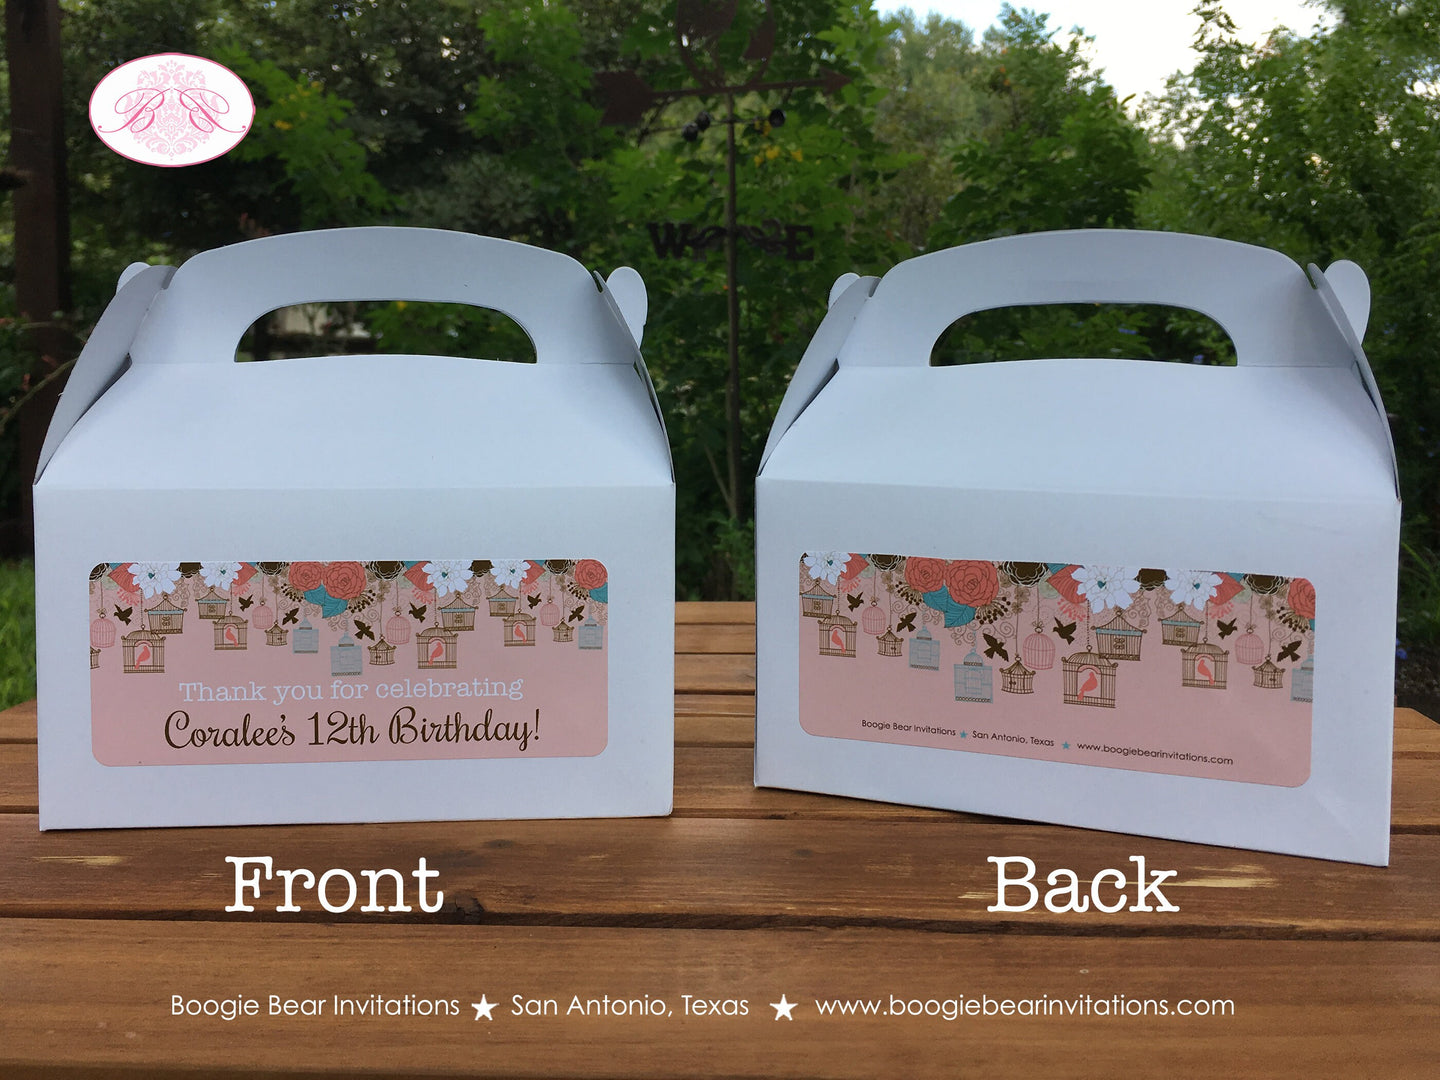 Garden Birds Birthday Party Treat Boxes Favor Tags Bag Coral Teal Birdcage Flower Garden Picnic Cage Boogie Bear Invitations Coralee Theme